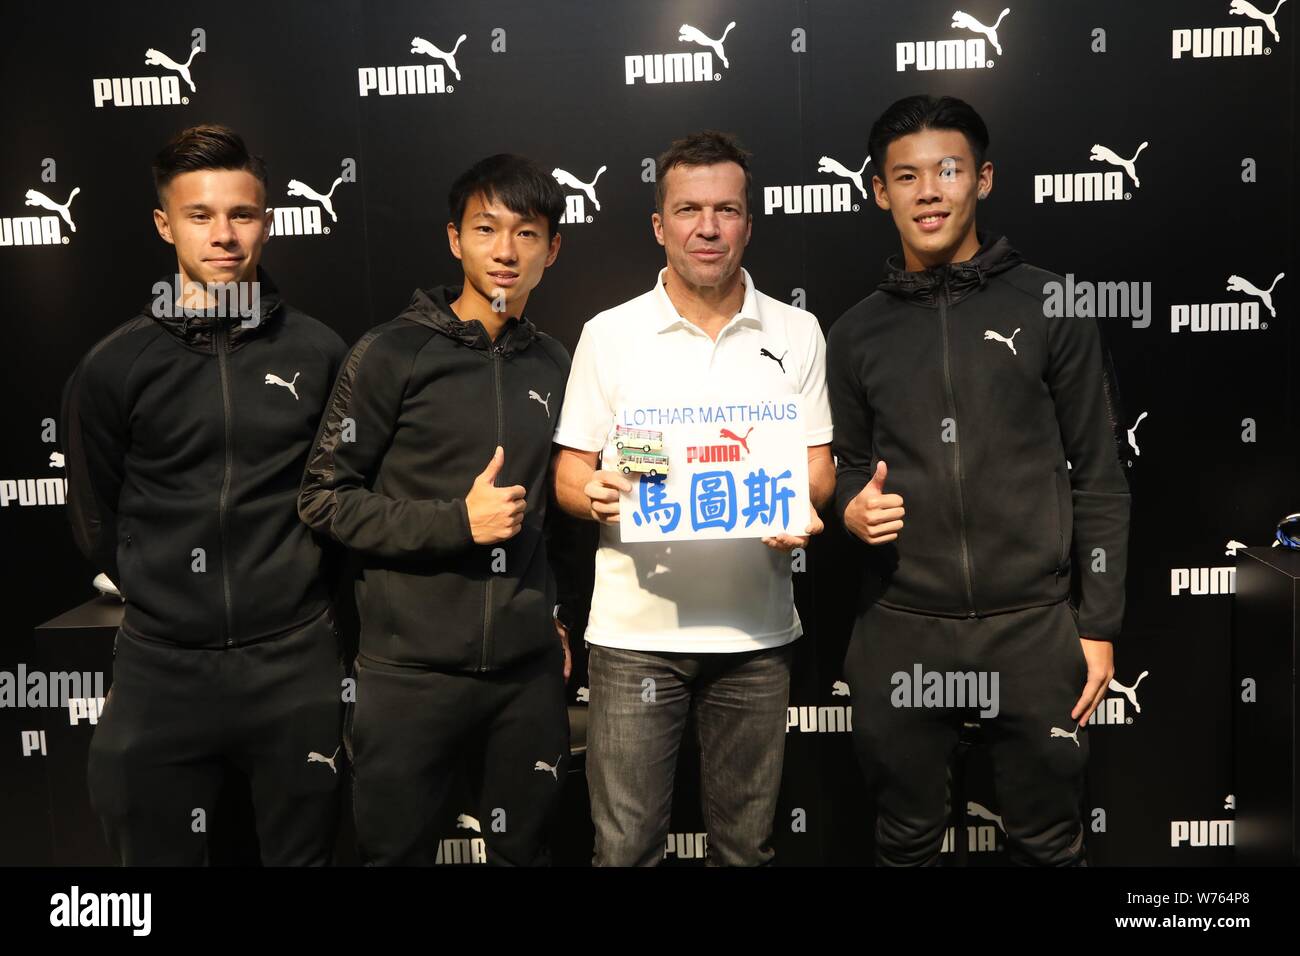 Former German football star Lothar Matthaus, second right, poses for photos  with fans during a promotional event for Puma in Hong Kong, China, 5 Decem  Stock Photo - Alamy